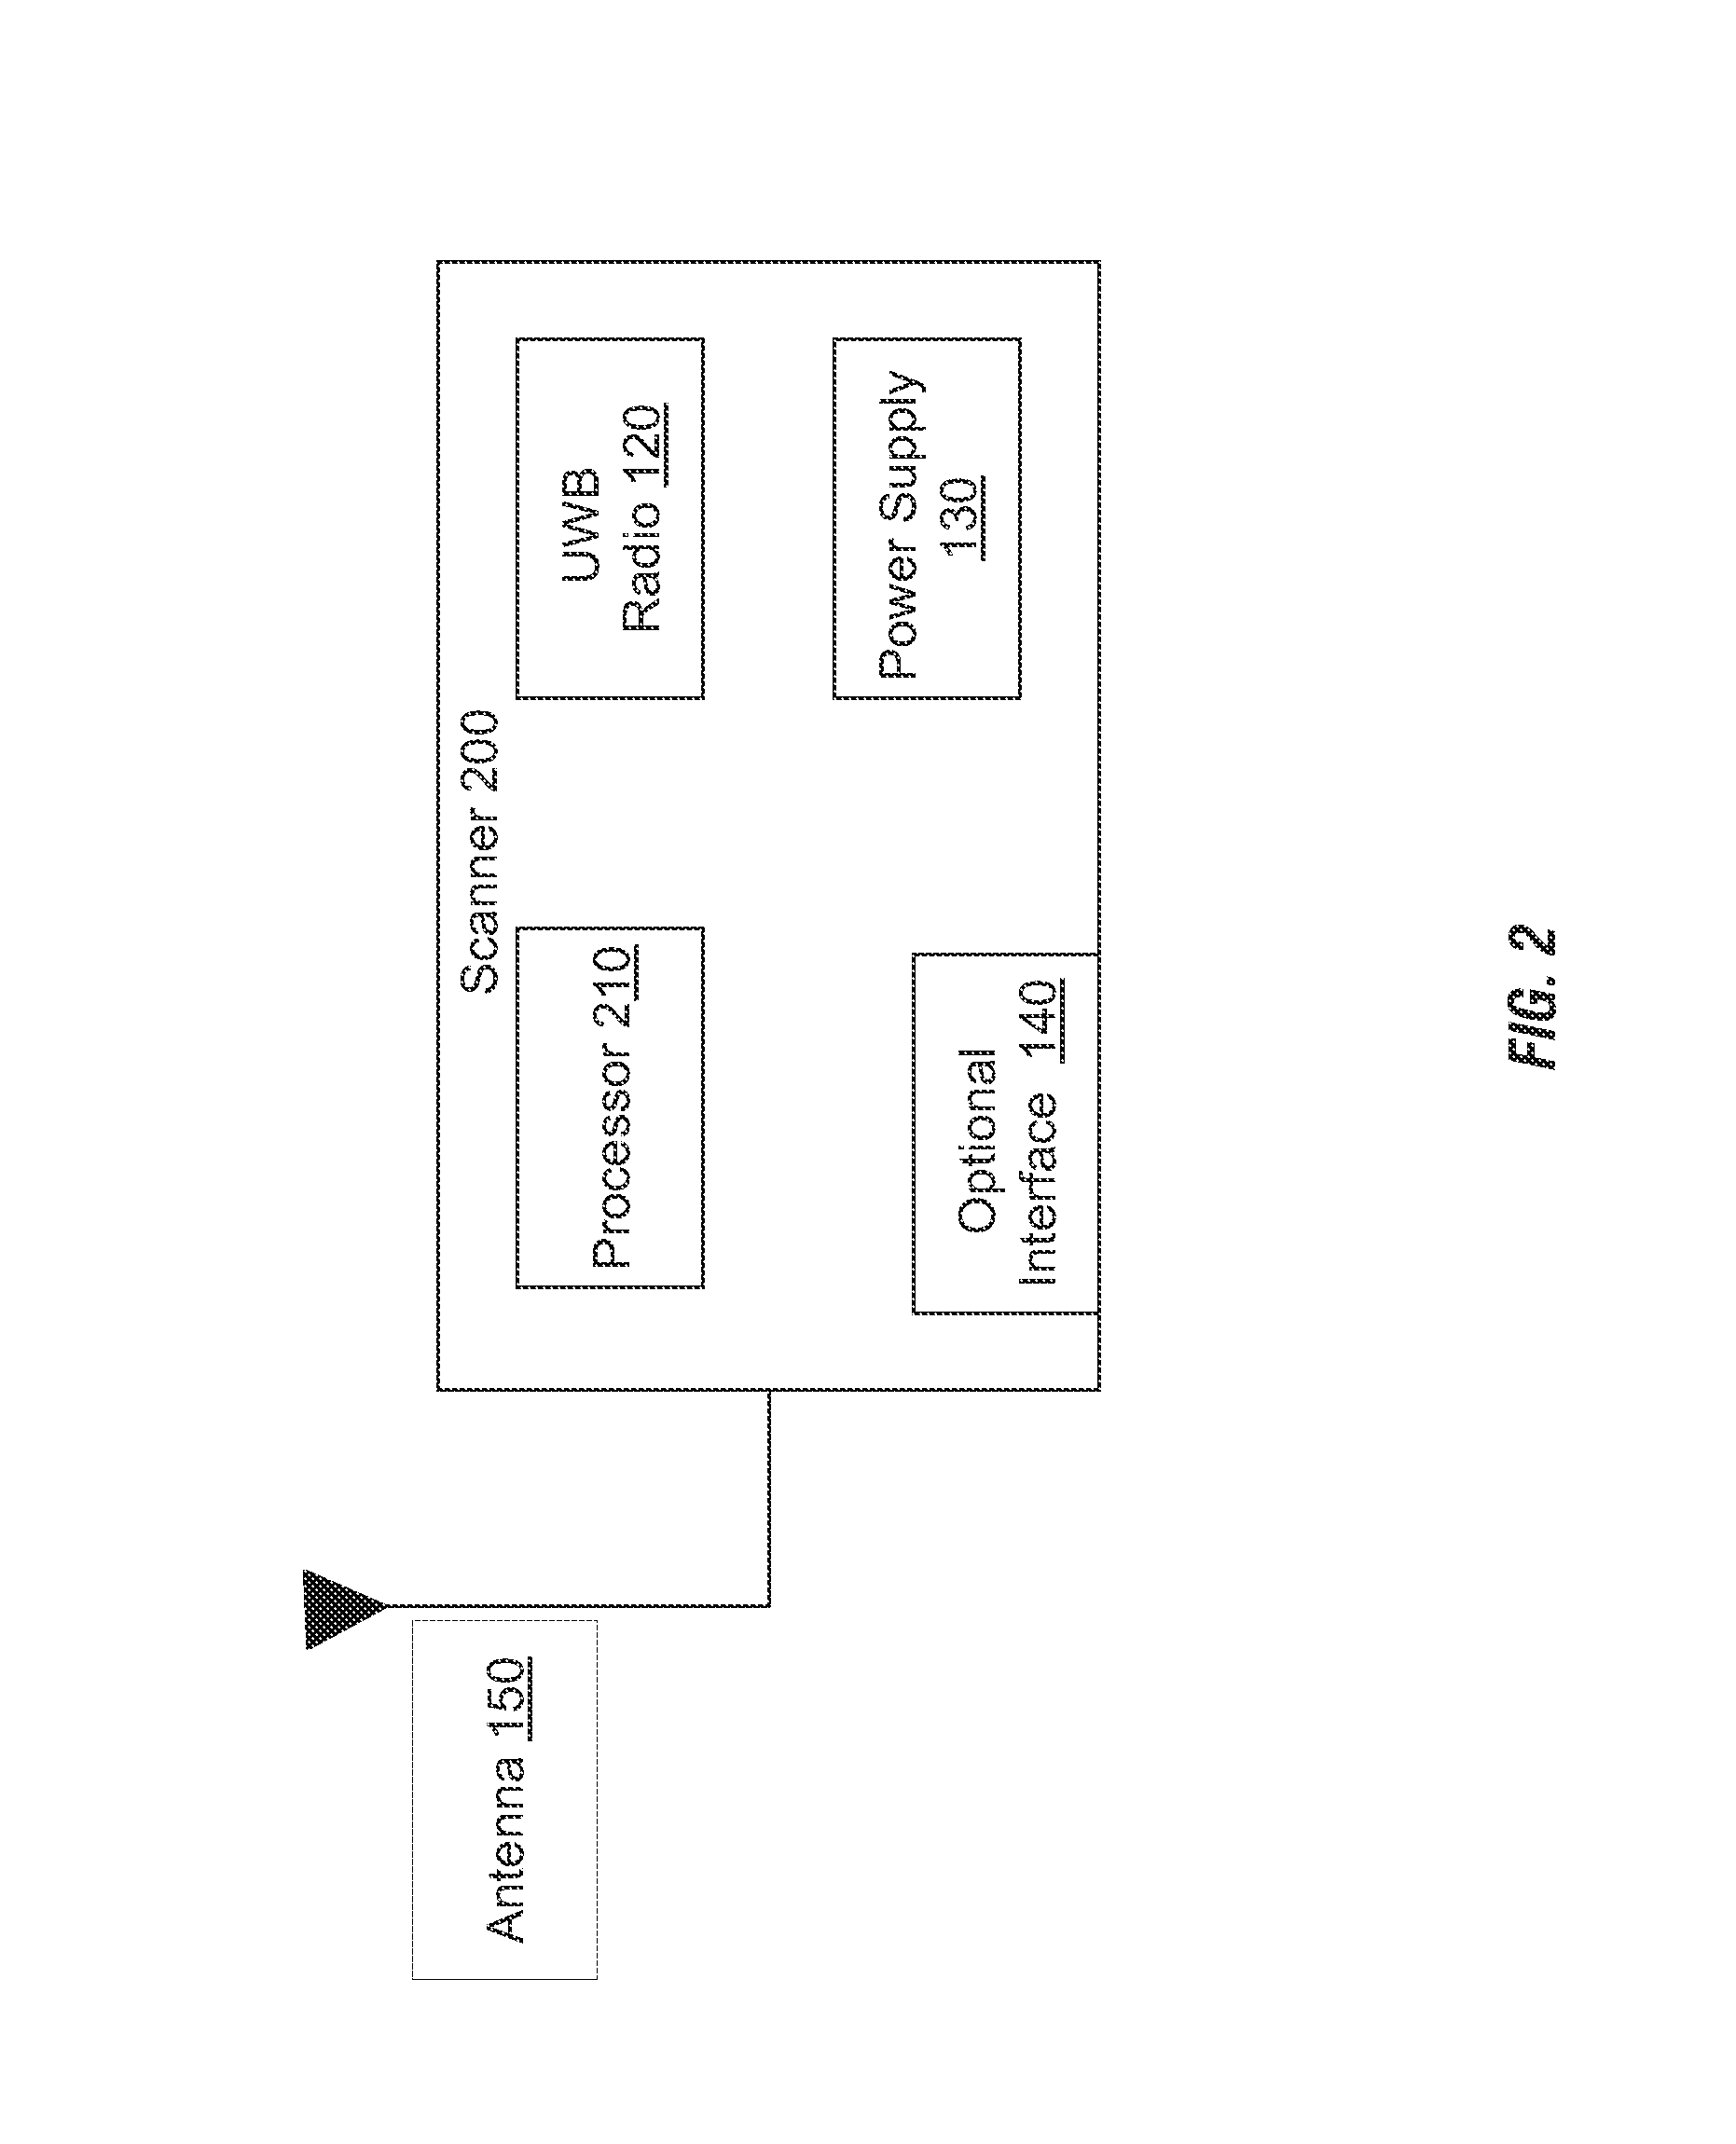 Ultra wideband radio frequency identification system, method, and apparatus